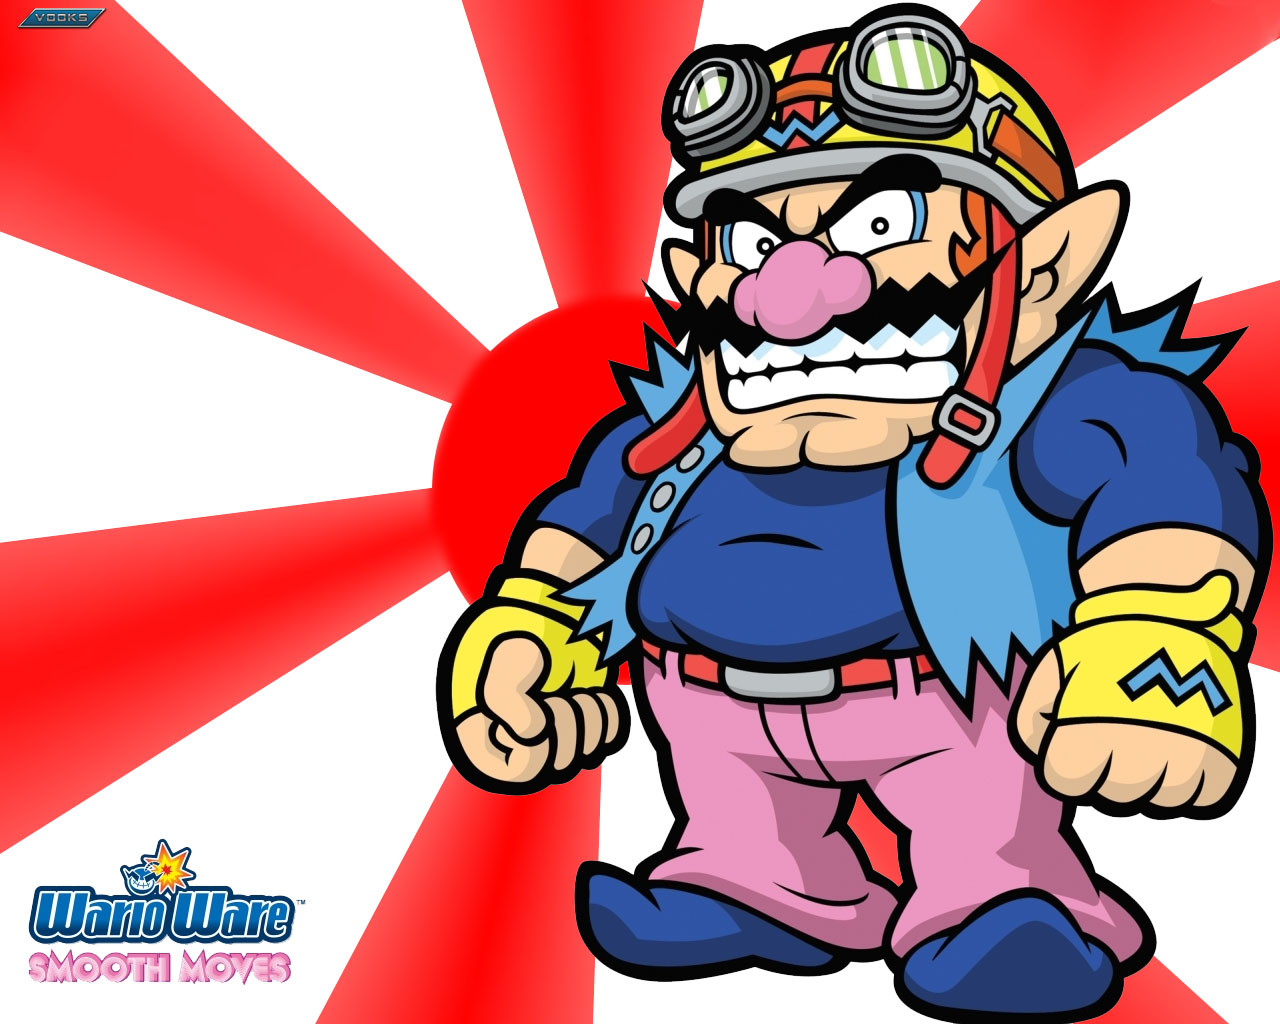 WarioWare: Smooth Moves Pics, Video Game Collection